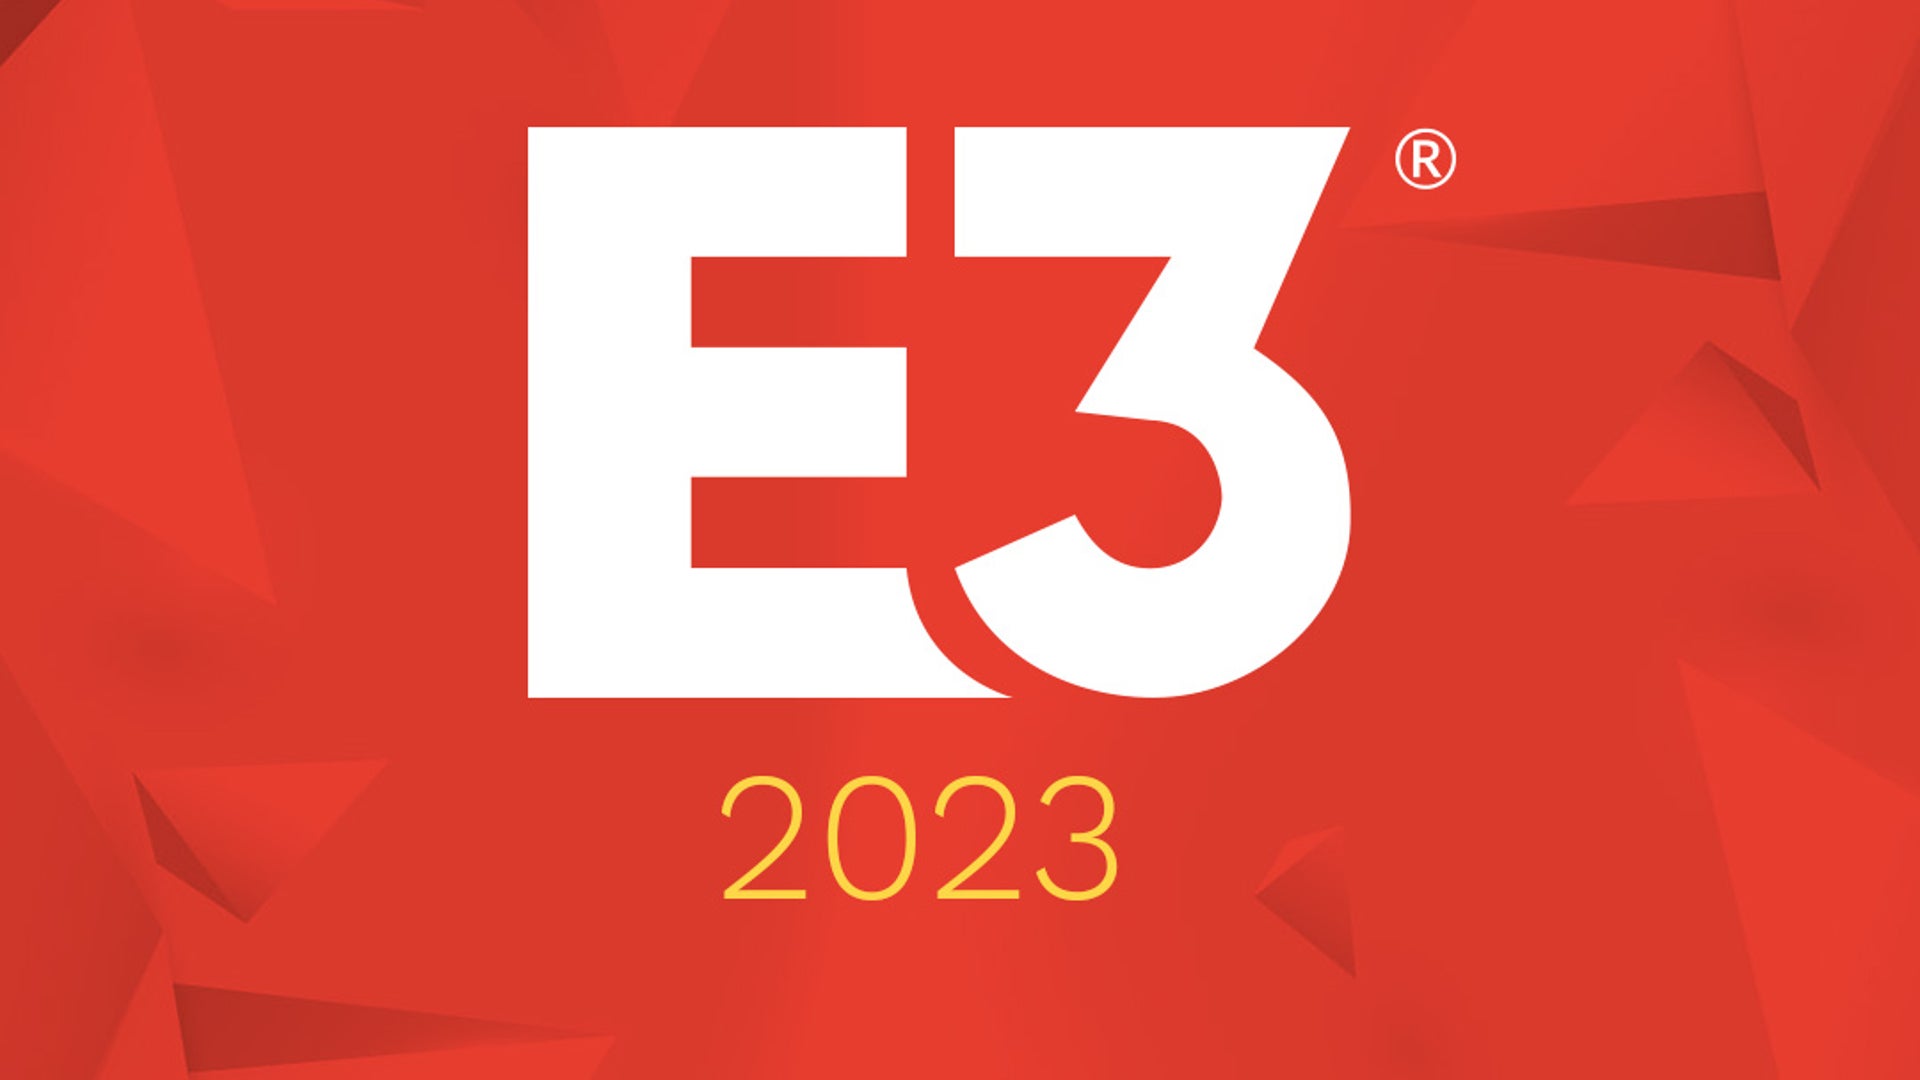 E3 2023 is being produced by convention organisers extraordinaire ReedPop.